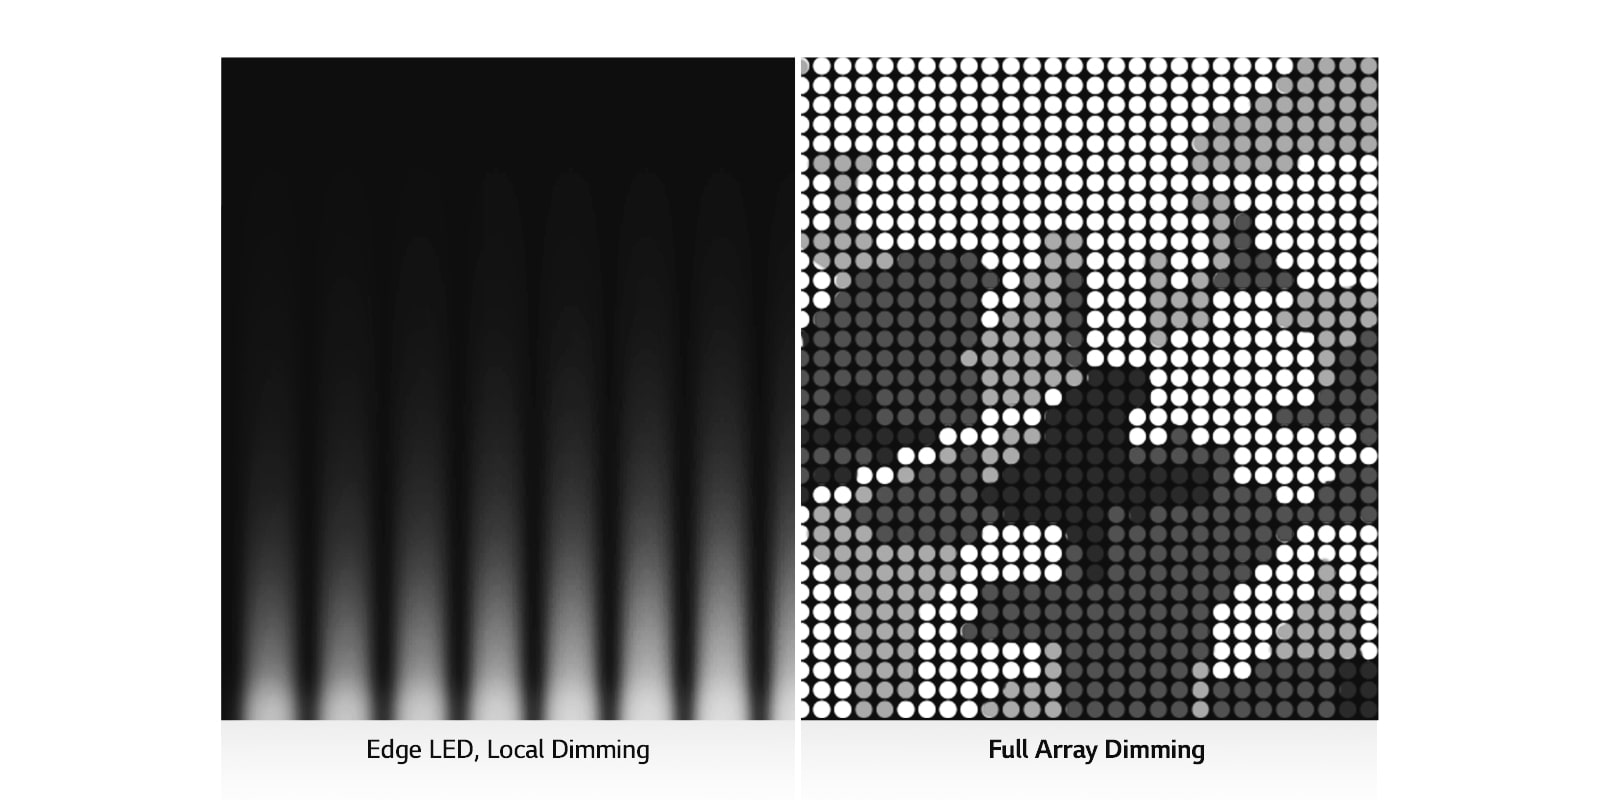 An image split down the middle showing different TV dimming technology. The left side shows Edge dimming, the right Full Array Dimming. More detail and sharp definition is shown on the right.